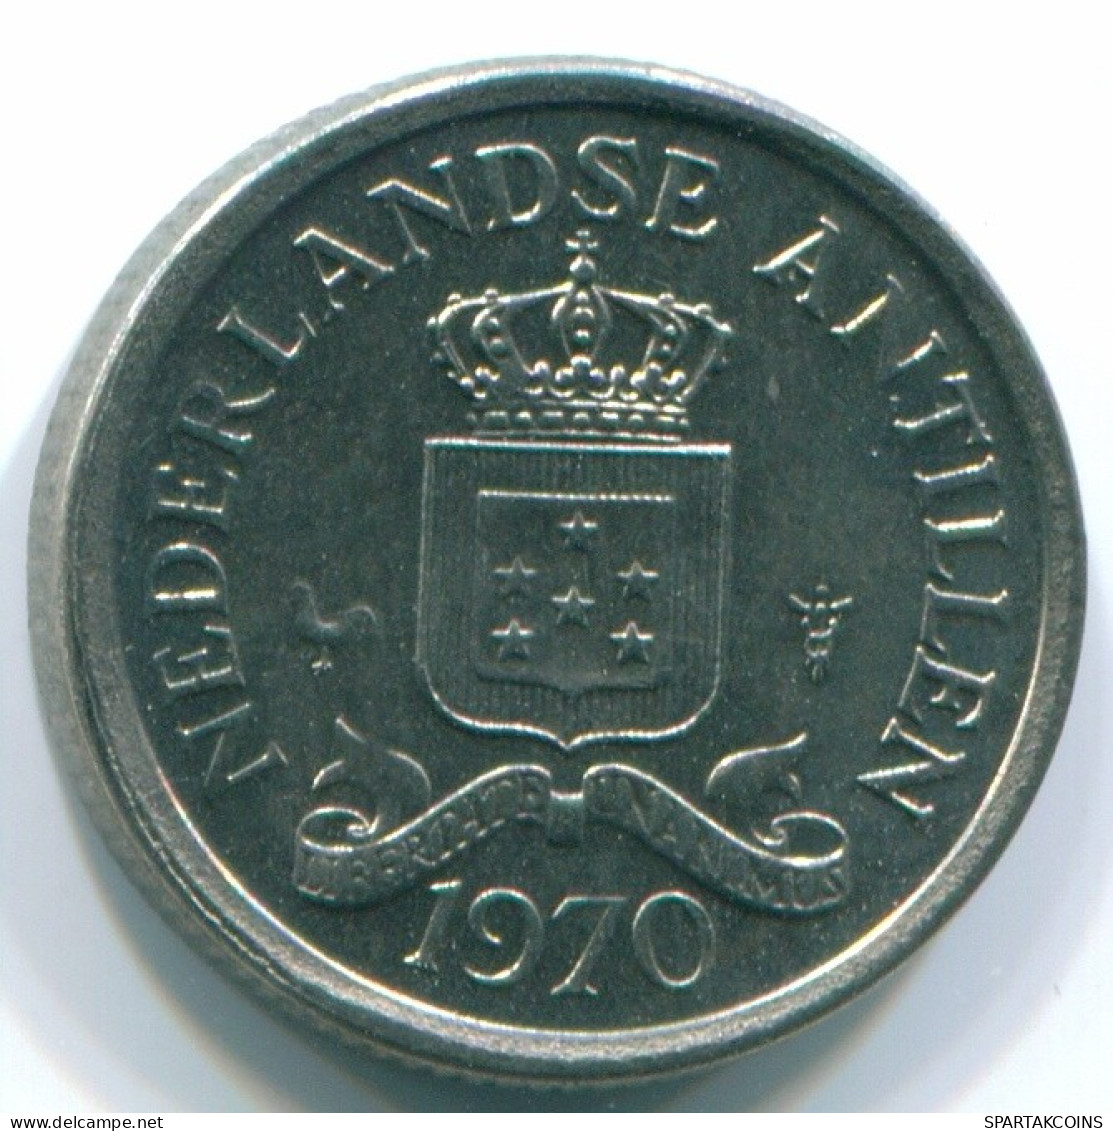 10 CENTS 1970 NETHERLANDS ANTILLES Nickel Colonial Coin #S13340.U.A - Netherlands Antilles